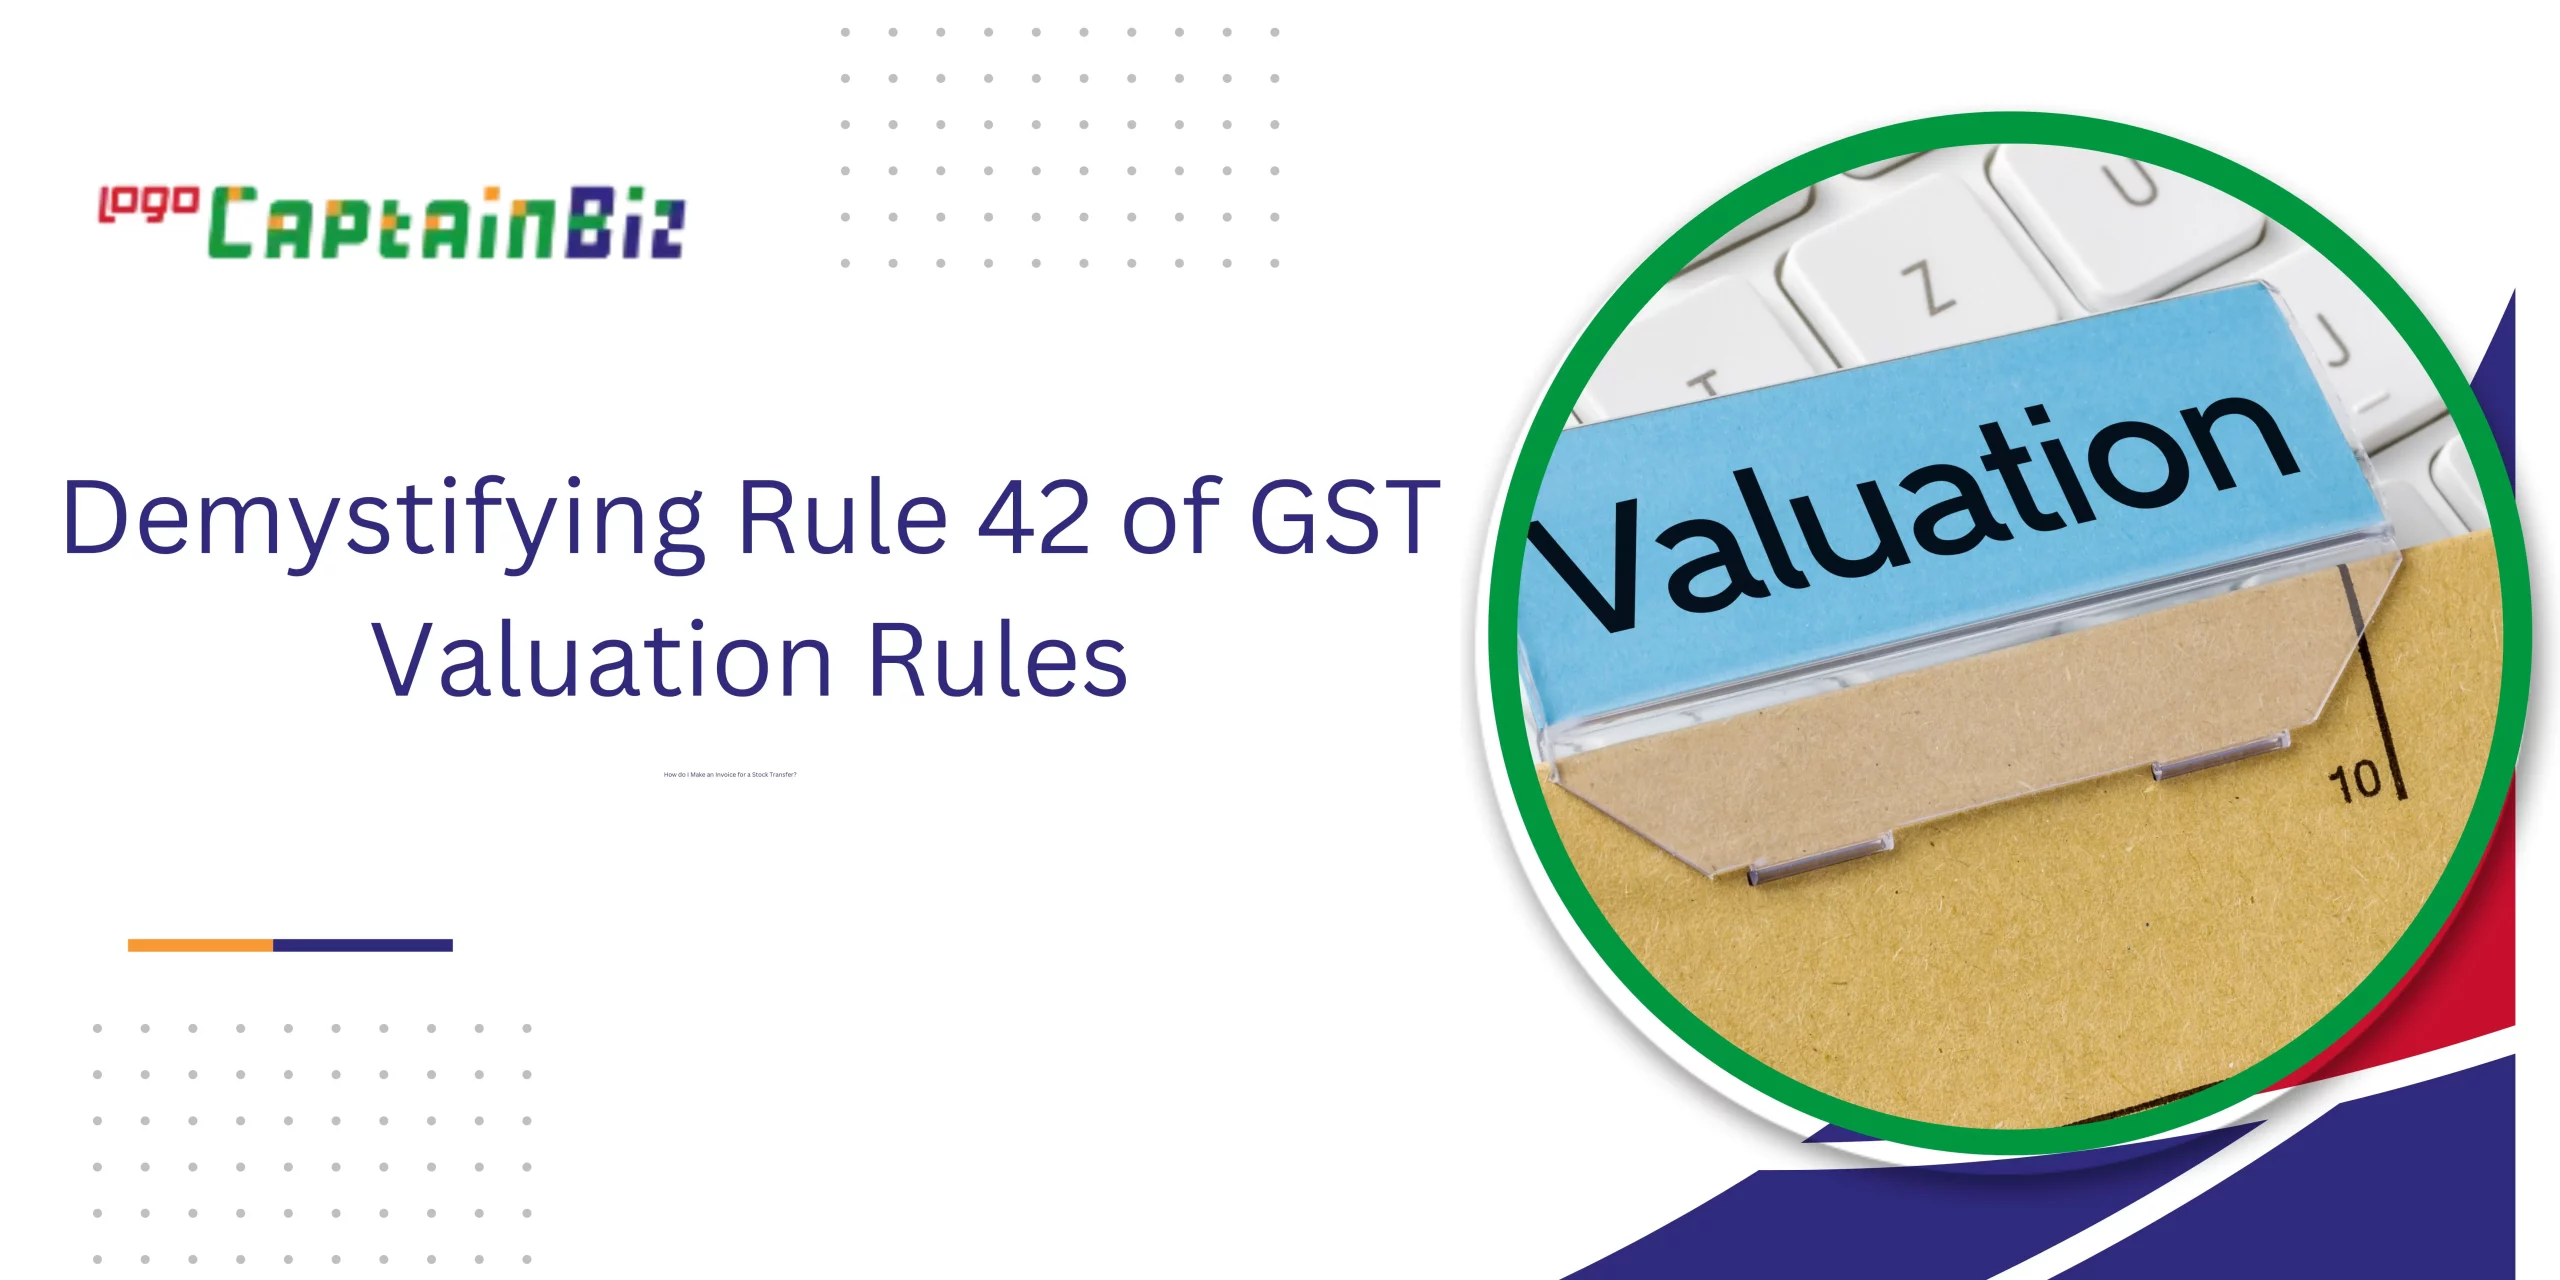 CaptainBiz: Demystifying Rule 42 of GST Valuation Rules